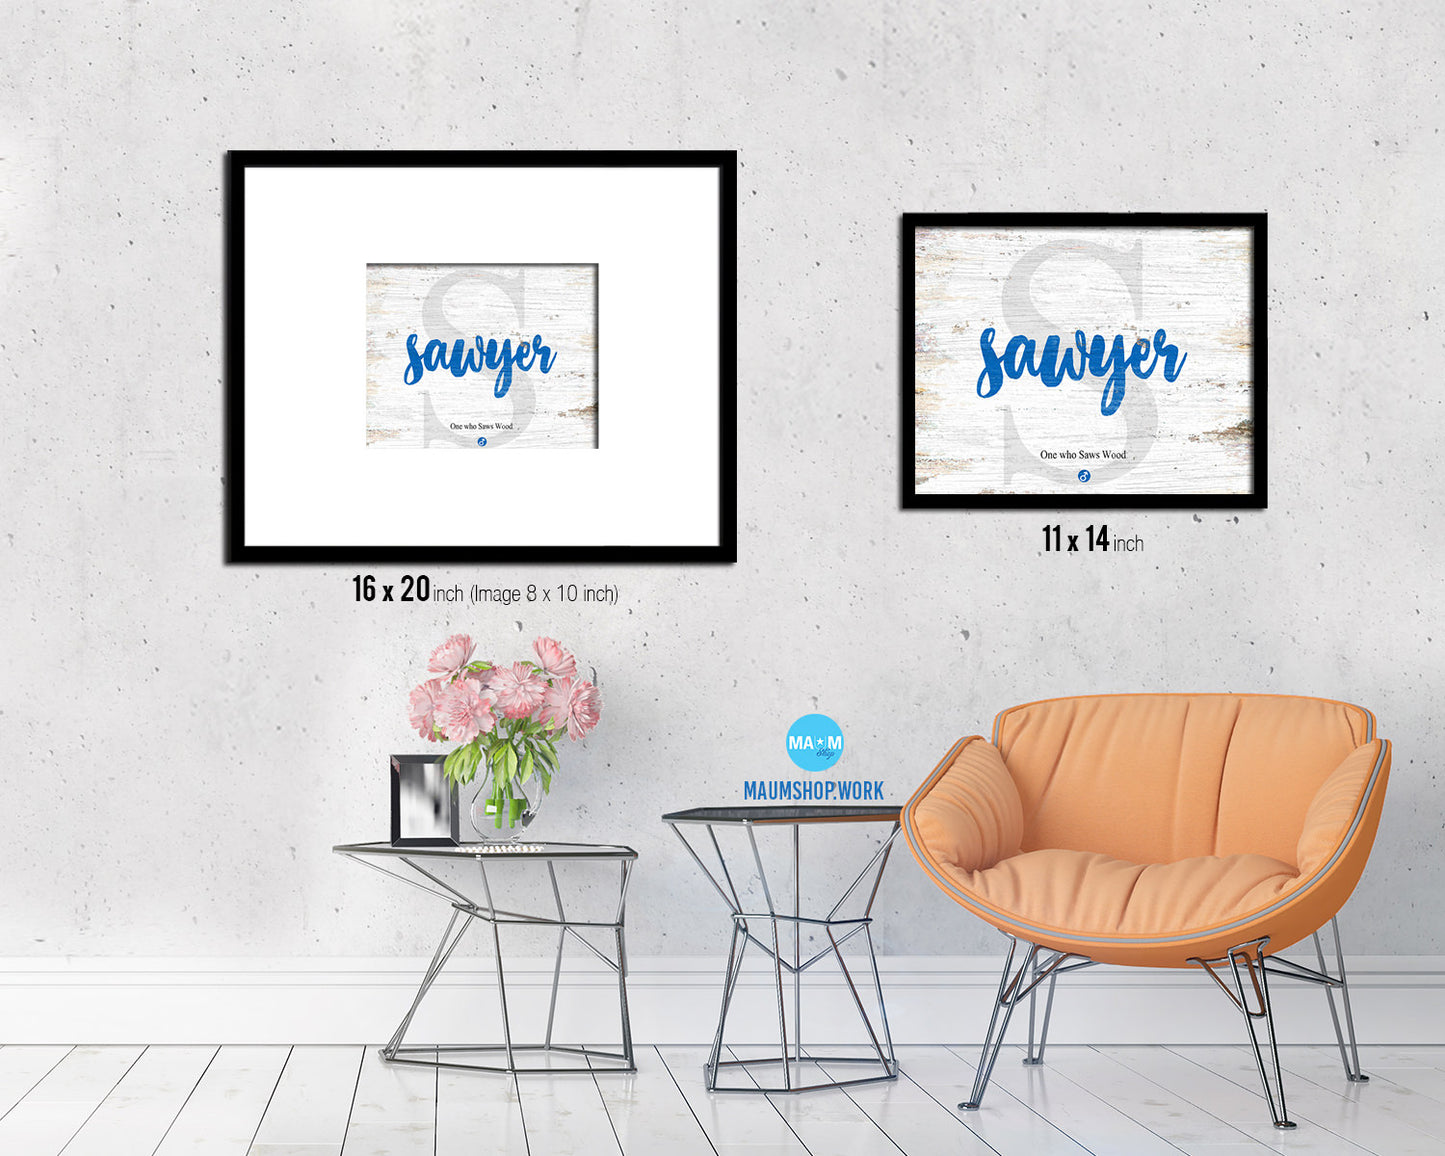 Sawyer Personalized Biblical Name Plate Art Framed Print Kids Baby Room Wall Decor Gifts